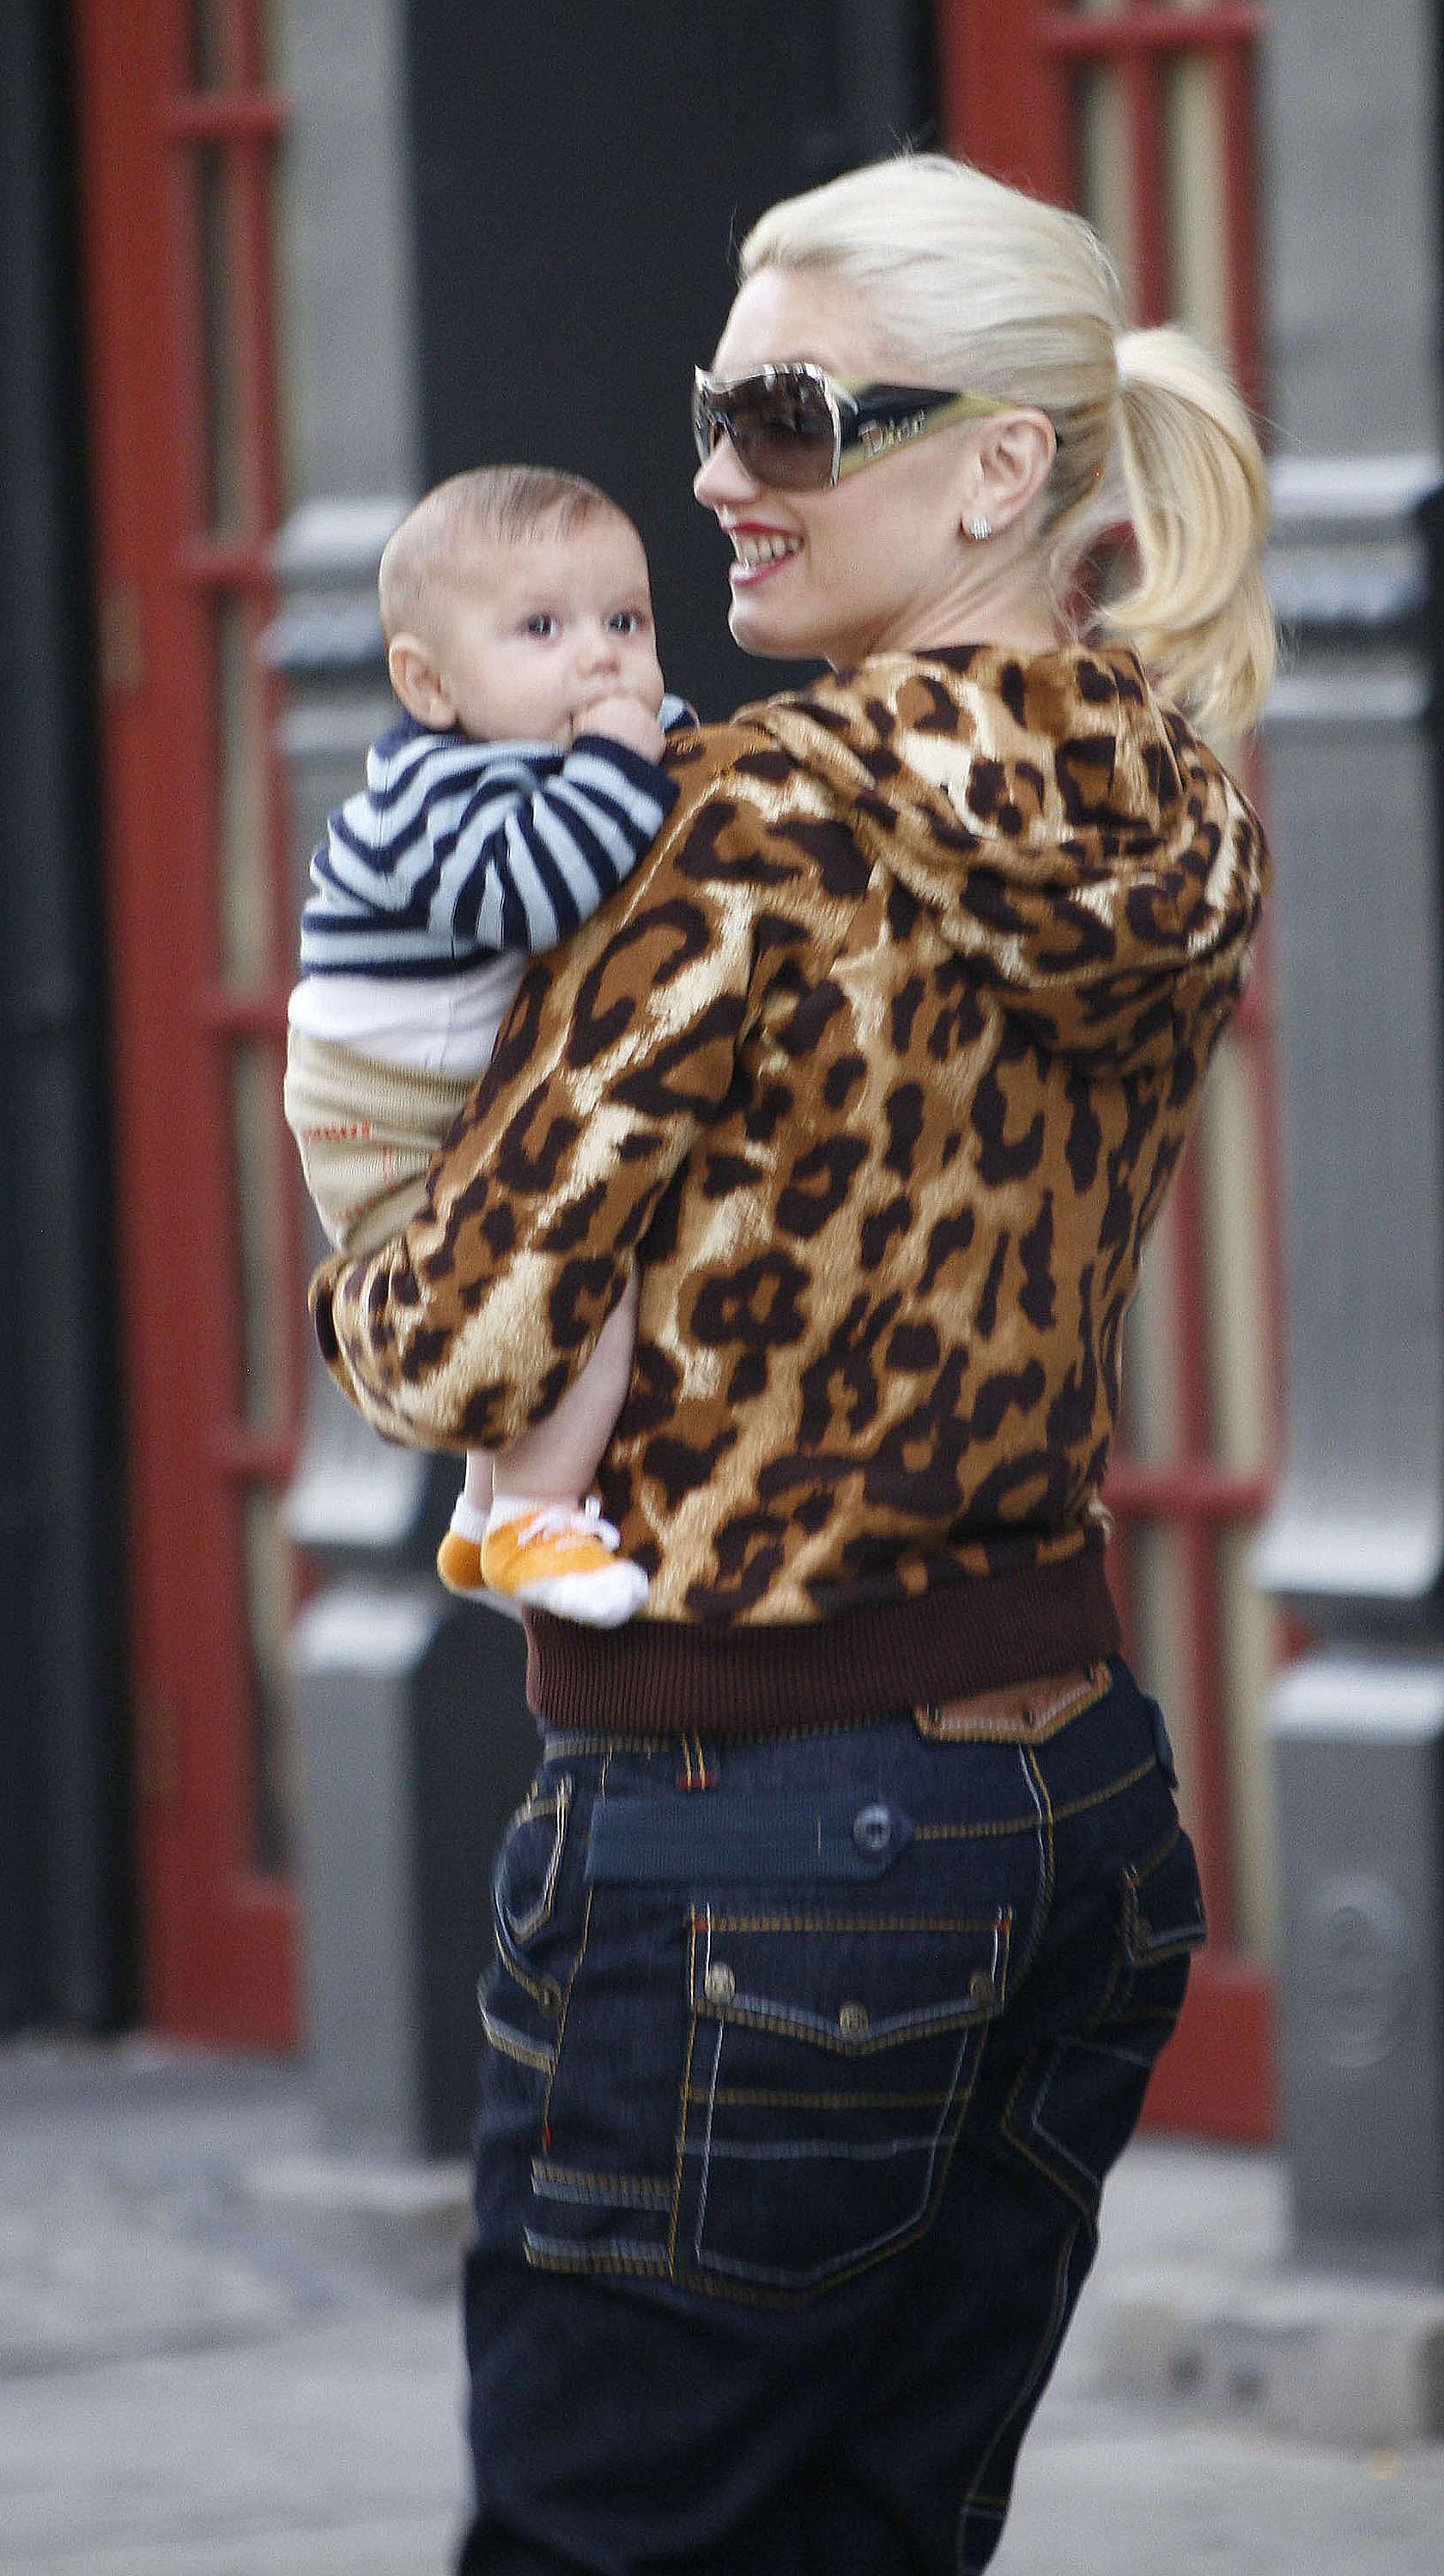 Gwen Stefani spotted with her son Kingston Rossdale in New York on September 11, 2006. | Source: Getty Images